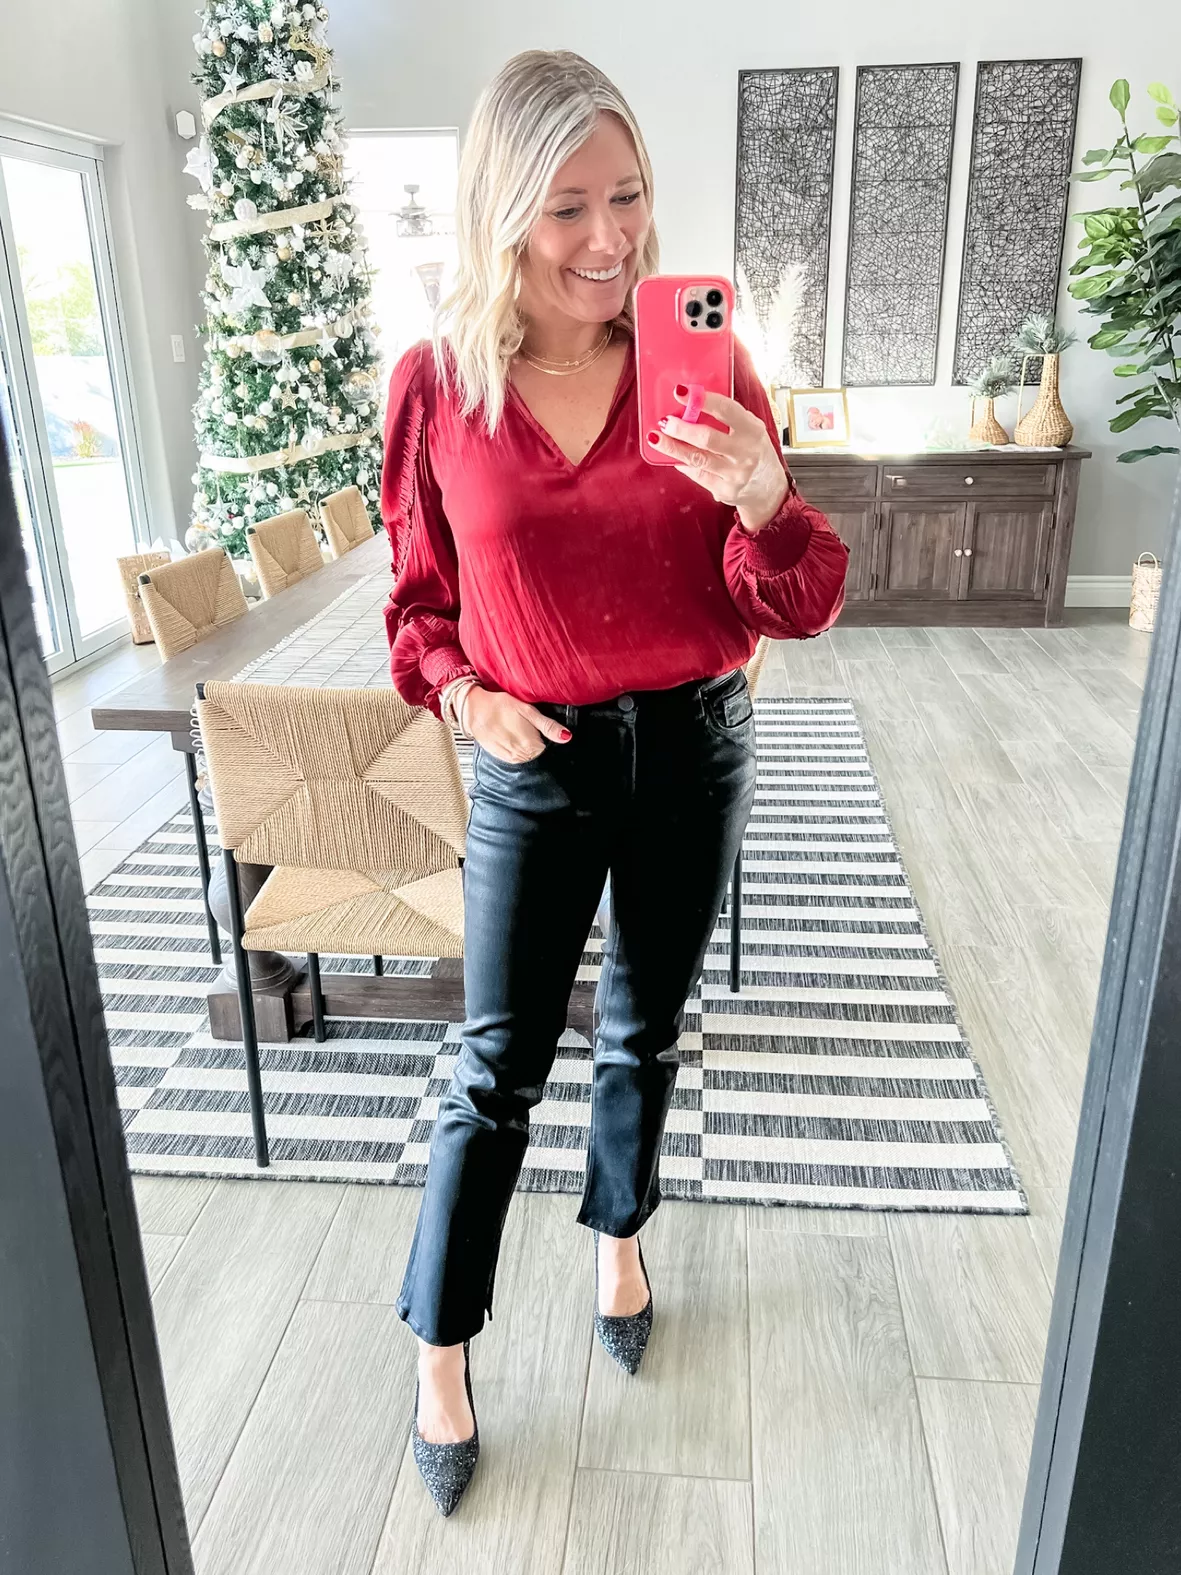 Black Leggings with Red Blouse Outfits (8 ideas & outfits)